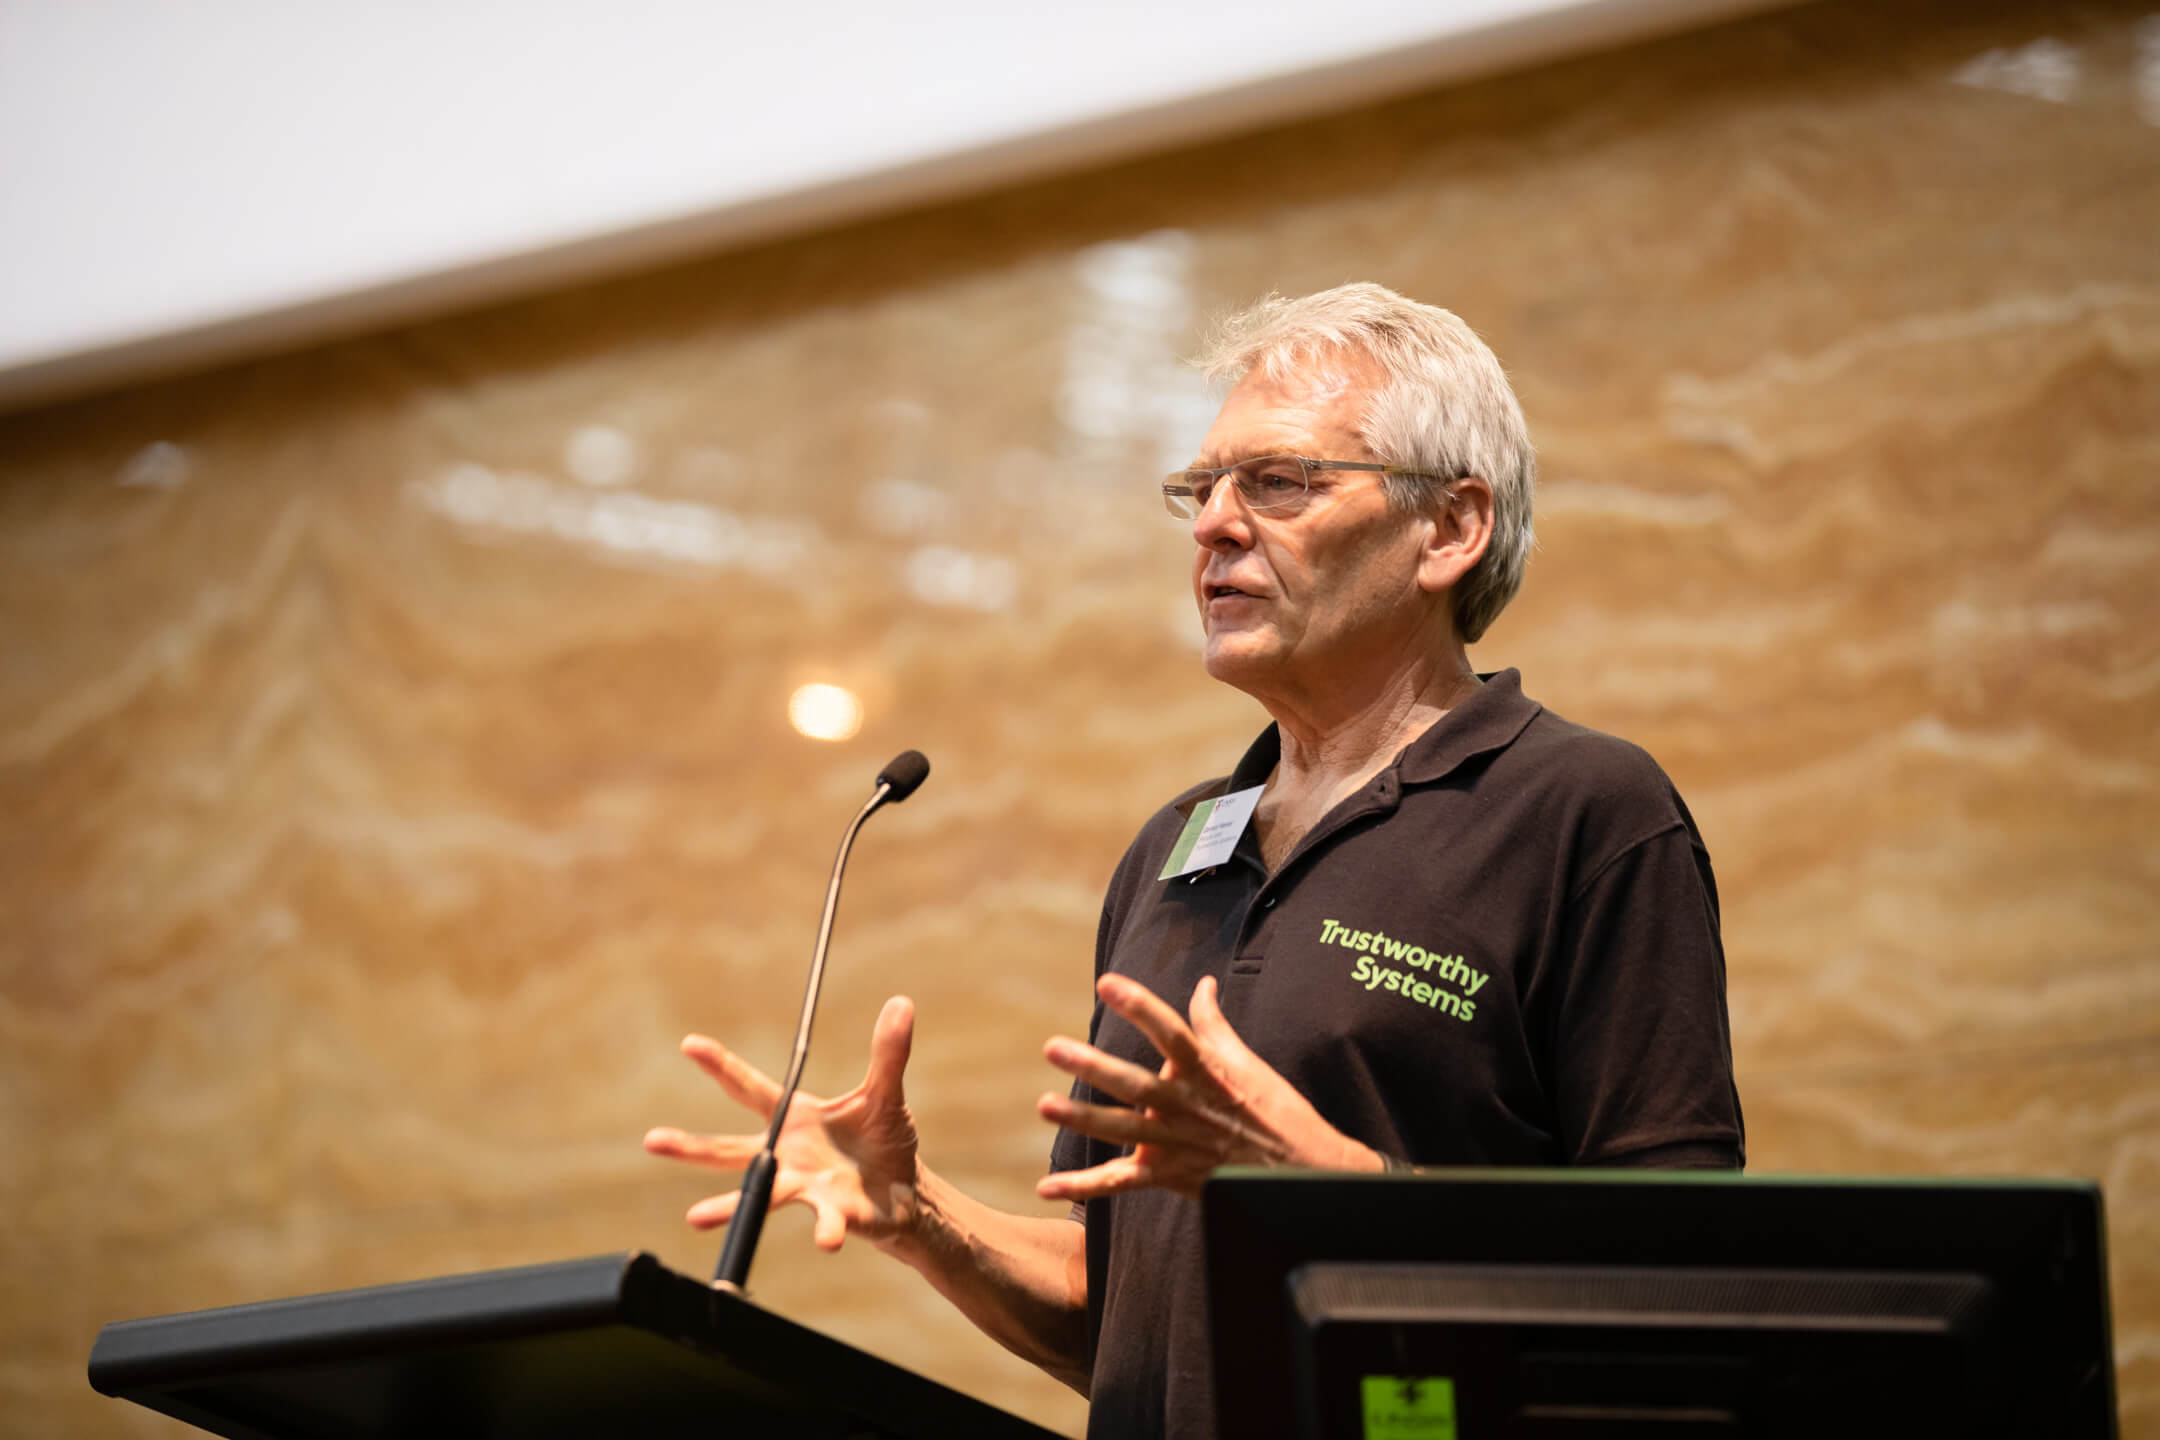 Gernot speaking at the UNSW CSE Expo in October 2022